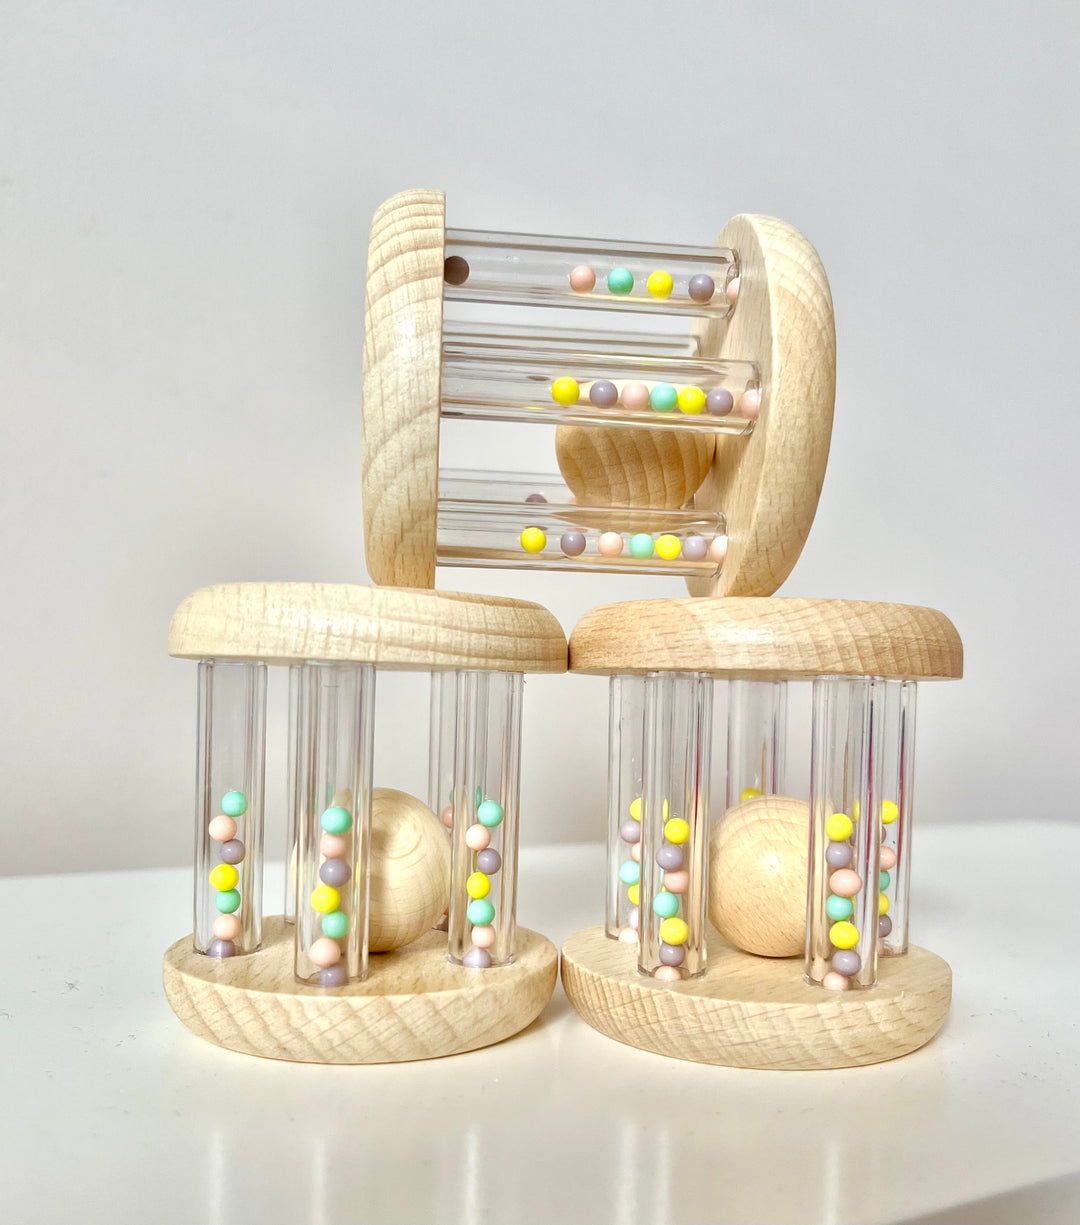 Wooden Shaker Rattle With Rainbow Beads